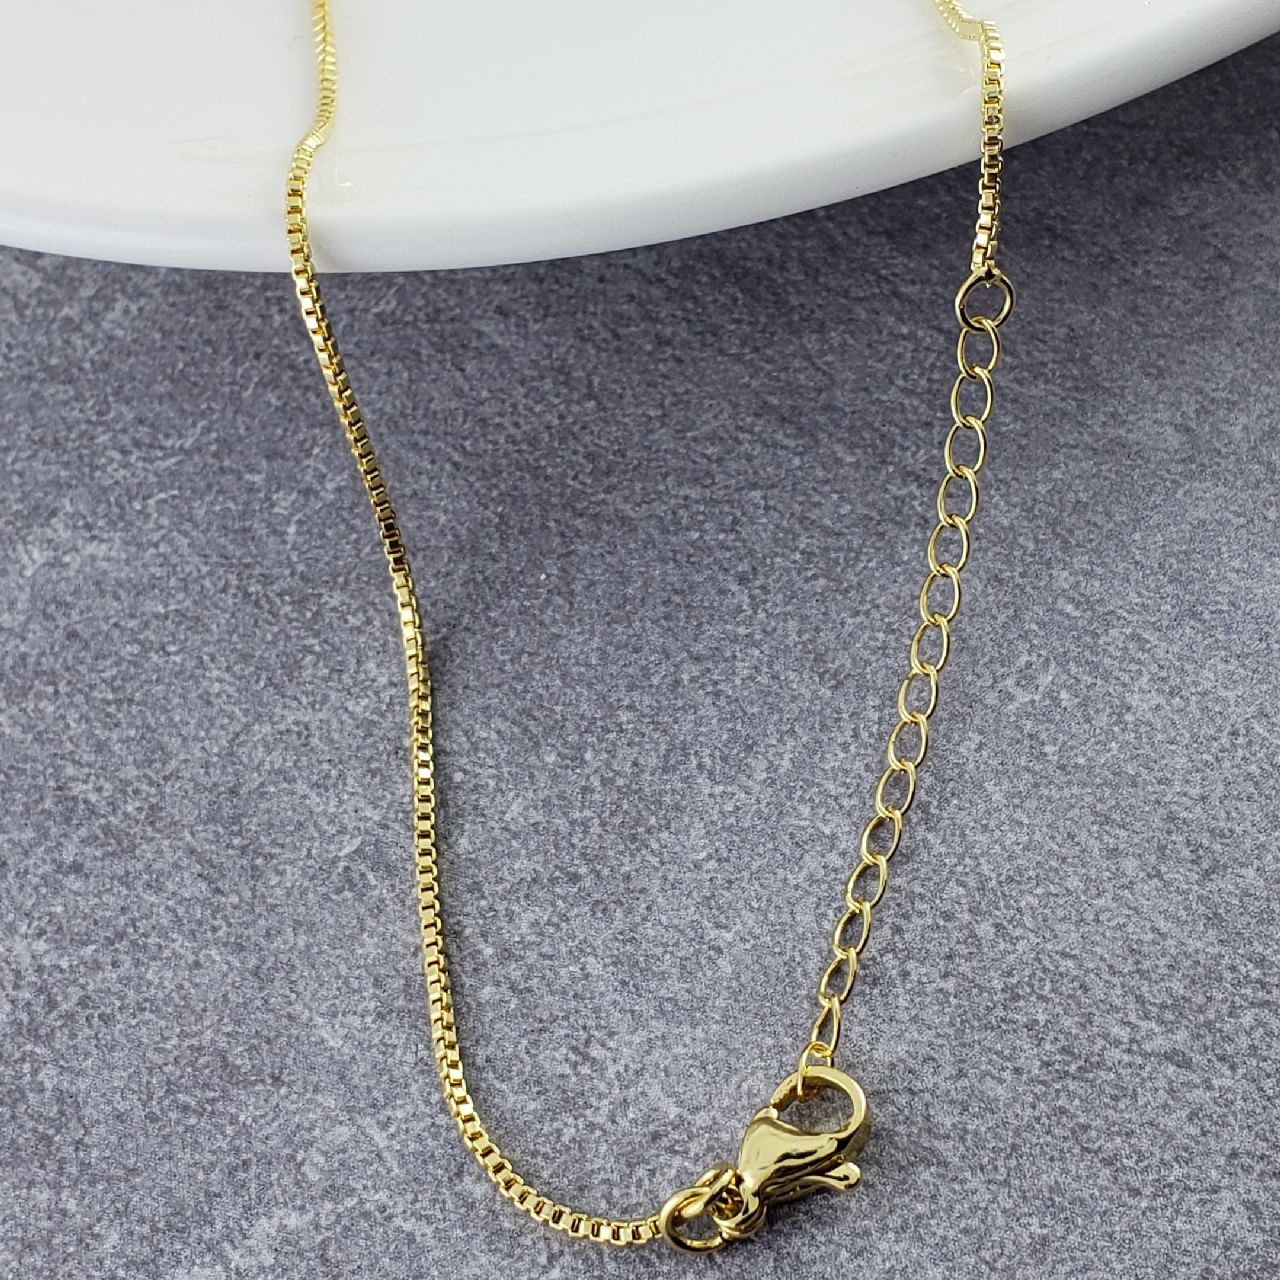 Krun Y Necklace Lock Pendant Simple Cute Necklaces Long Multilayer Chain  Fashion Jewelry Women Girls Gift for Her | Cute necklace, Lock necklace,  Womens necklaces